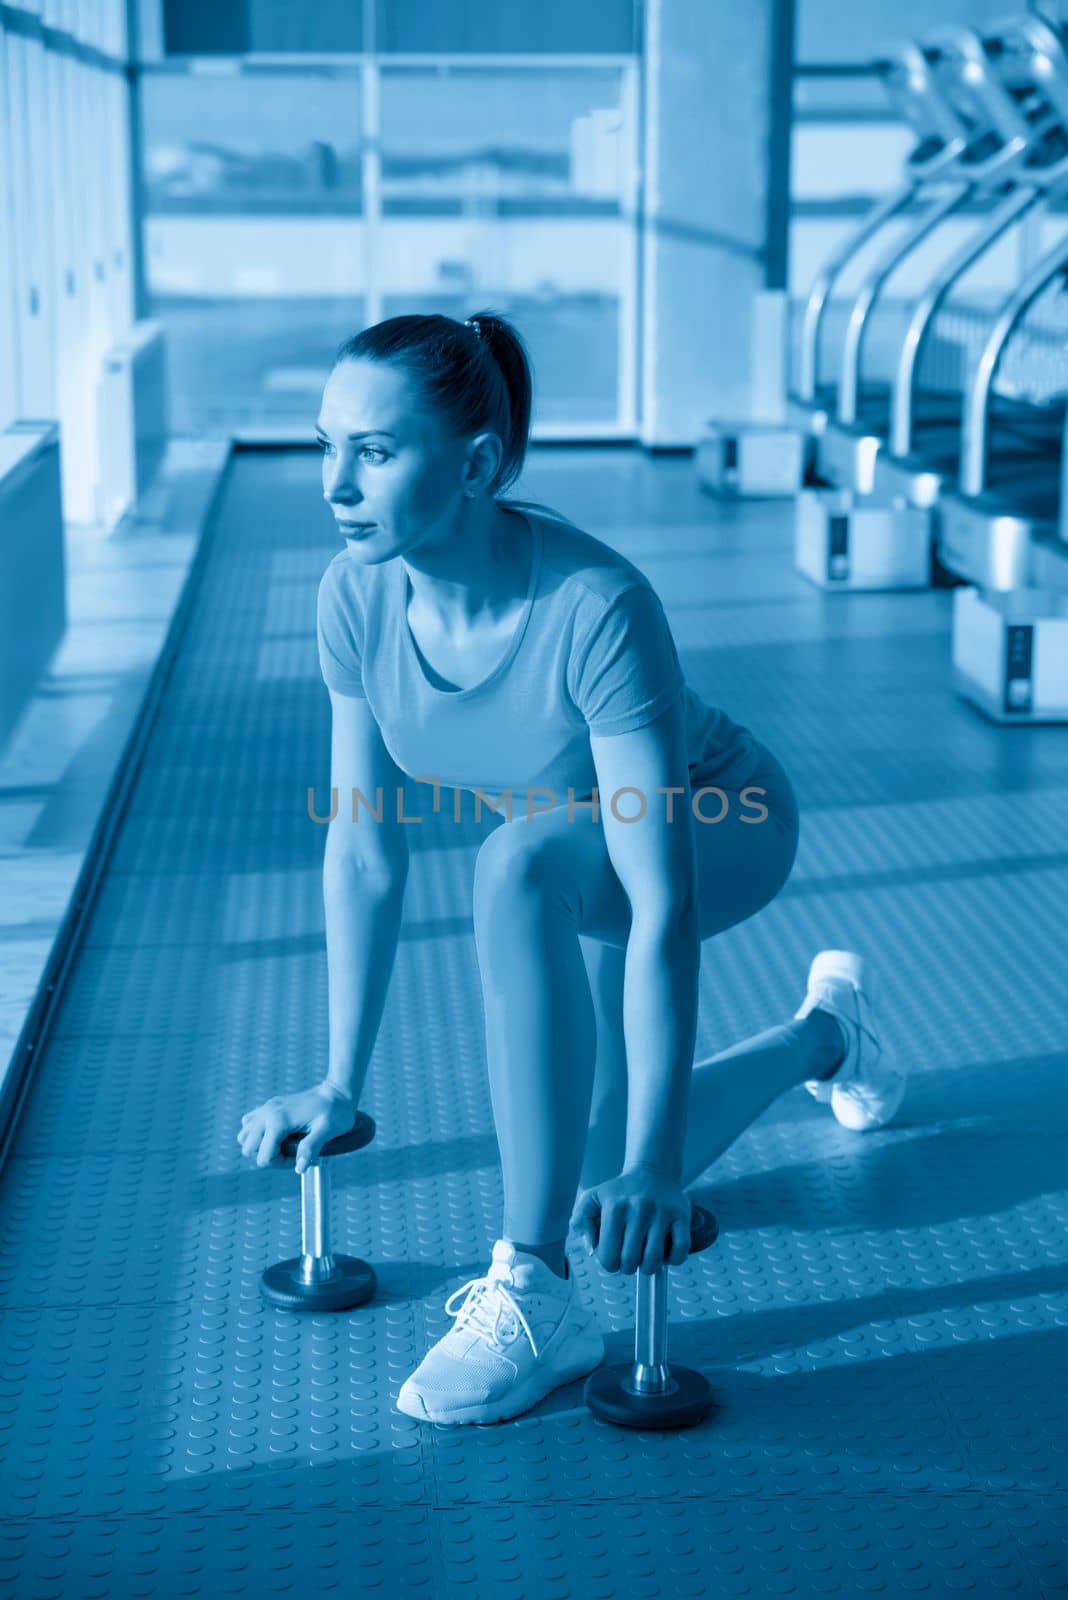 Physically fit woman at the gym lifting dumbbells to strengthen her arms and biceps. Muscular woman sitting on exercise mat looking at her arms.